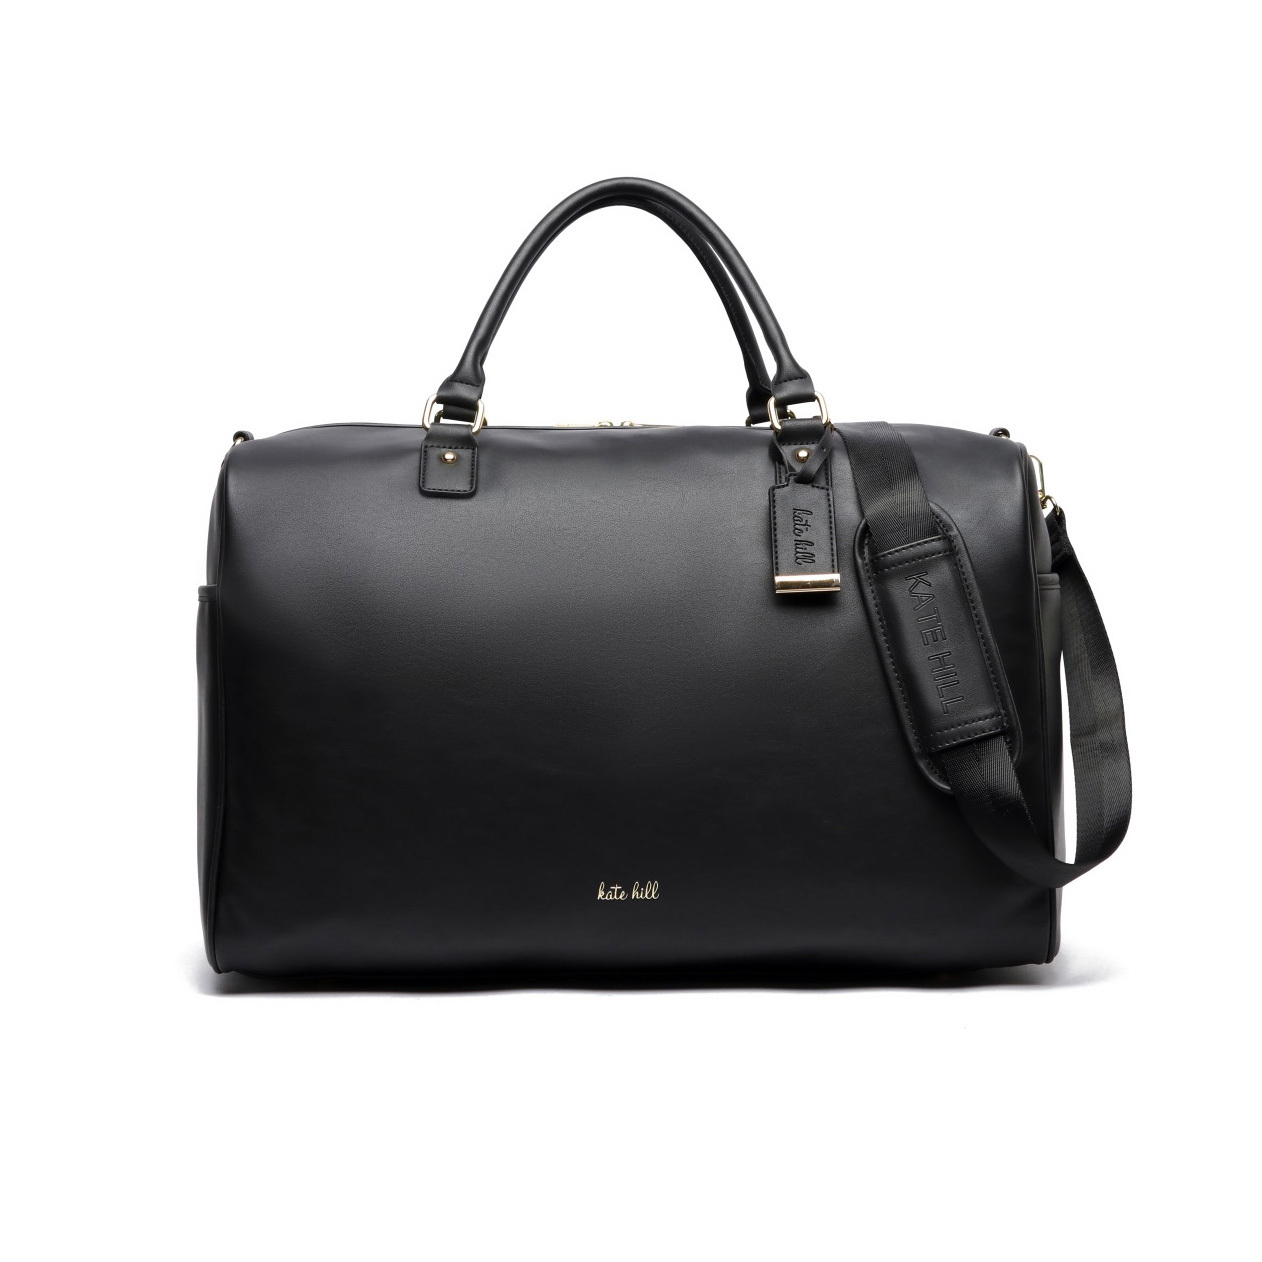 Kate Hill Leather Bags, Wallets & Accessories | Bags To Go